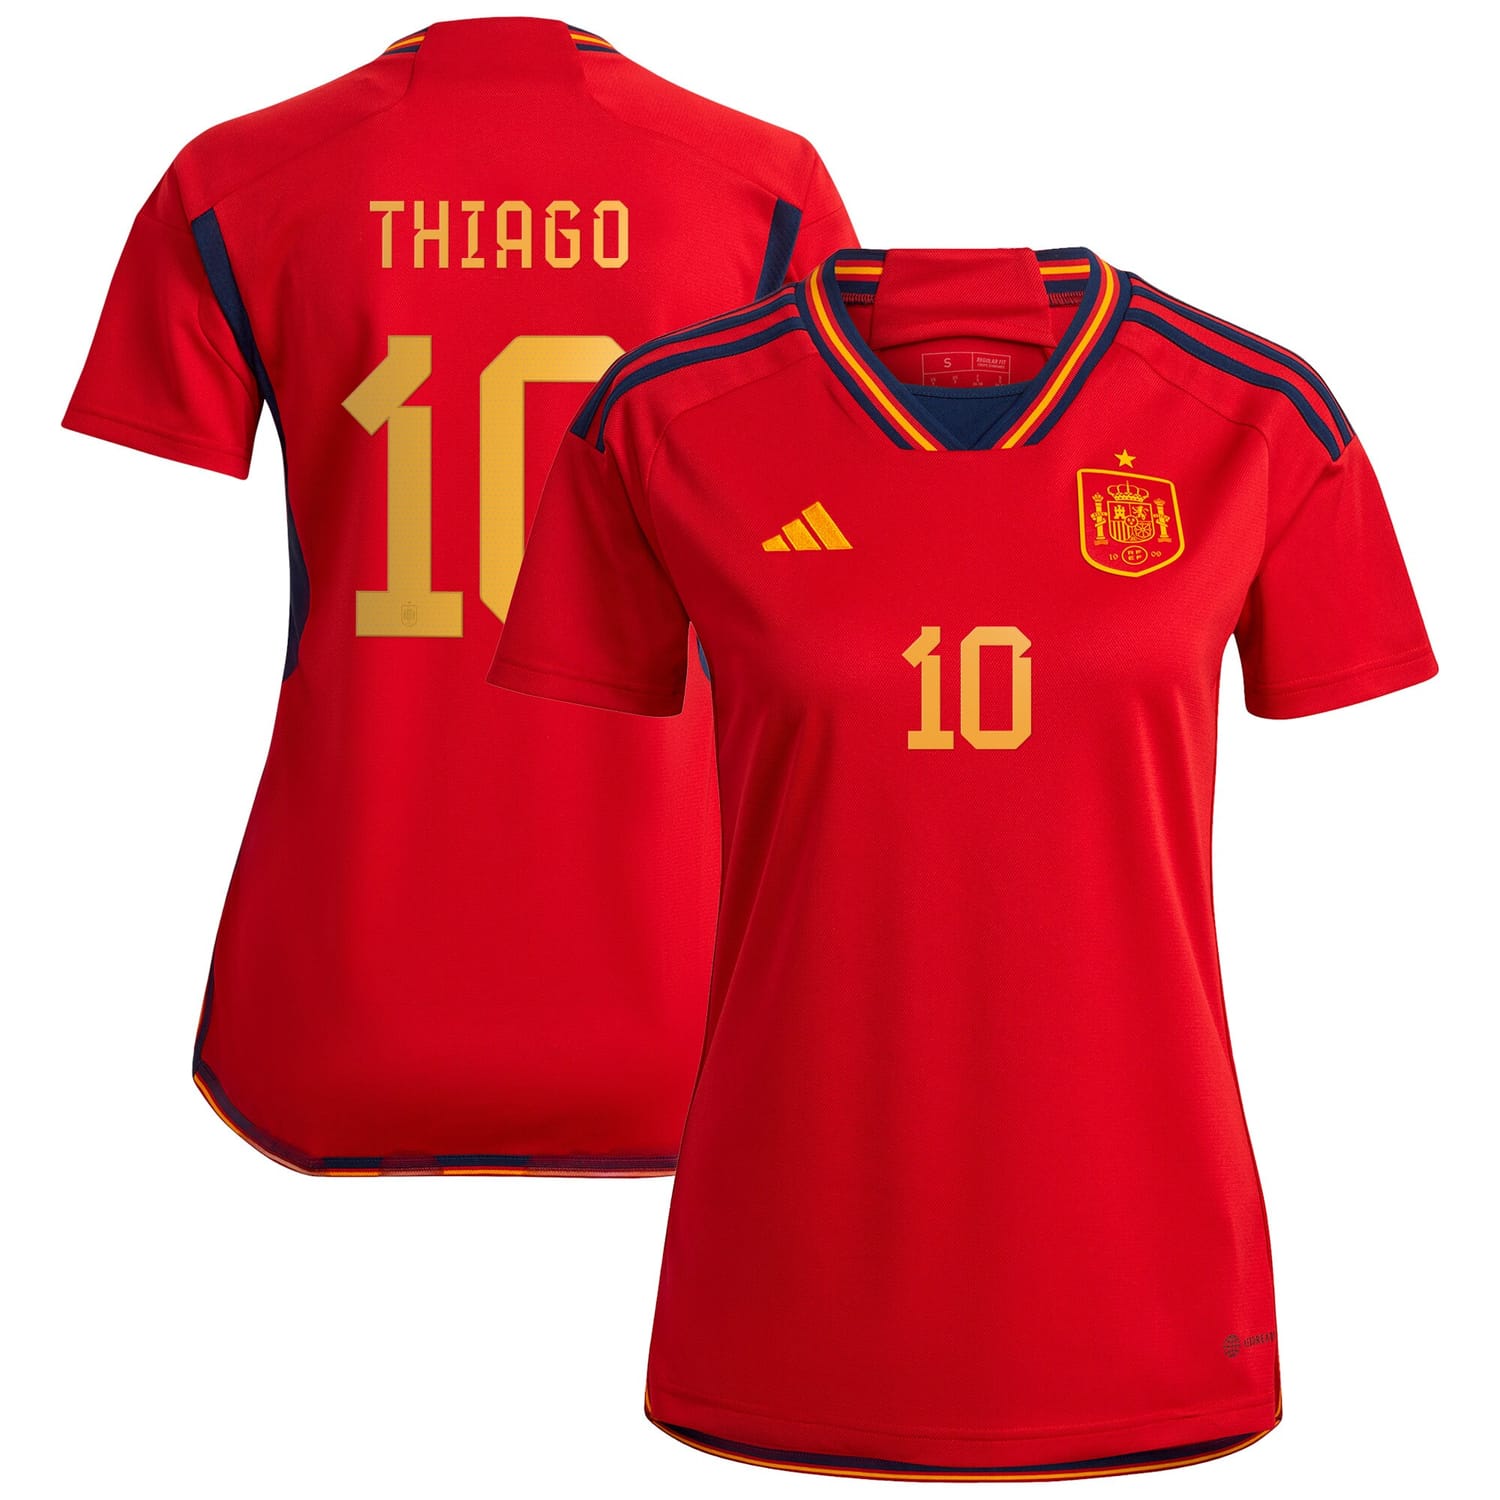 Spain National Team Home Jersey Shirt player Thiago 10 printing for Women